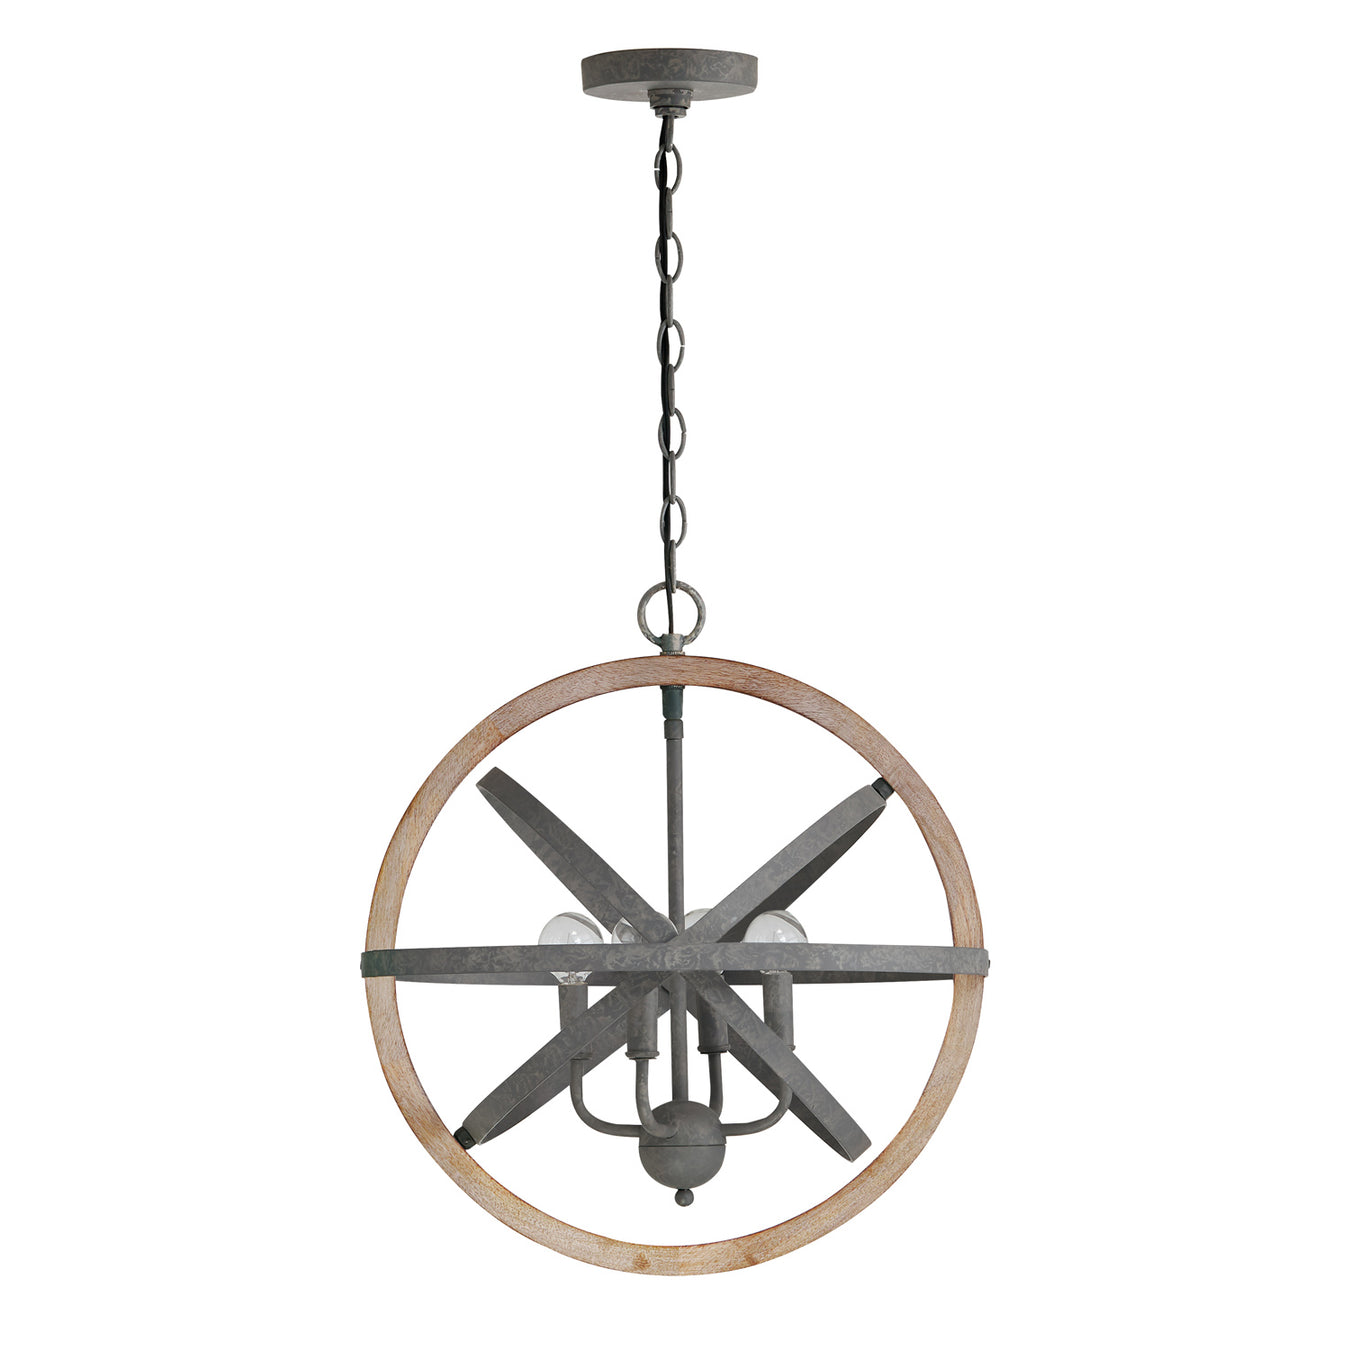 Bluffton Four Light Pendant in Iron and Wood